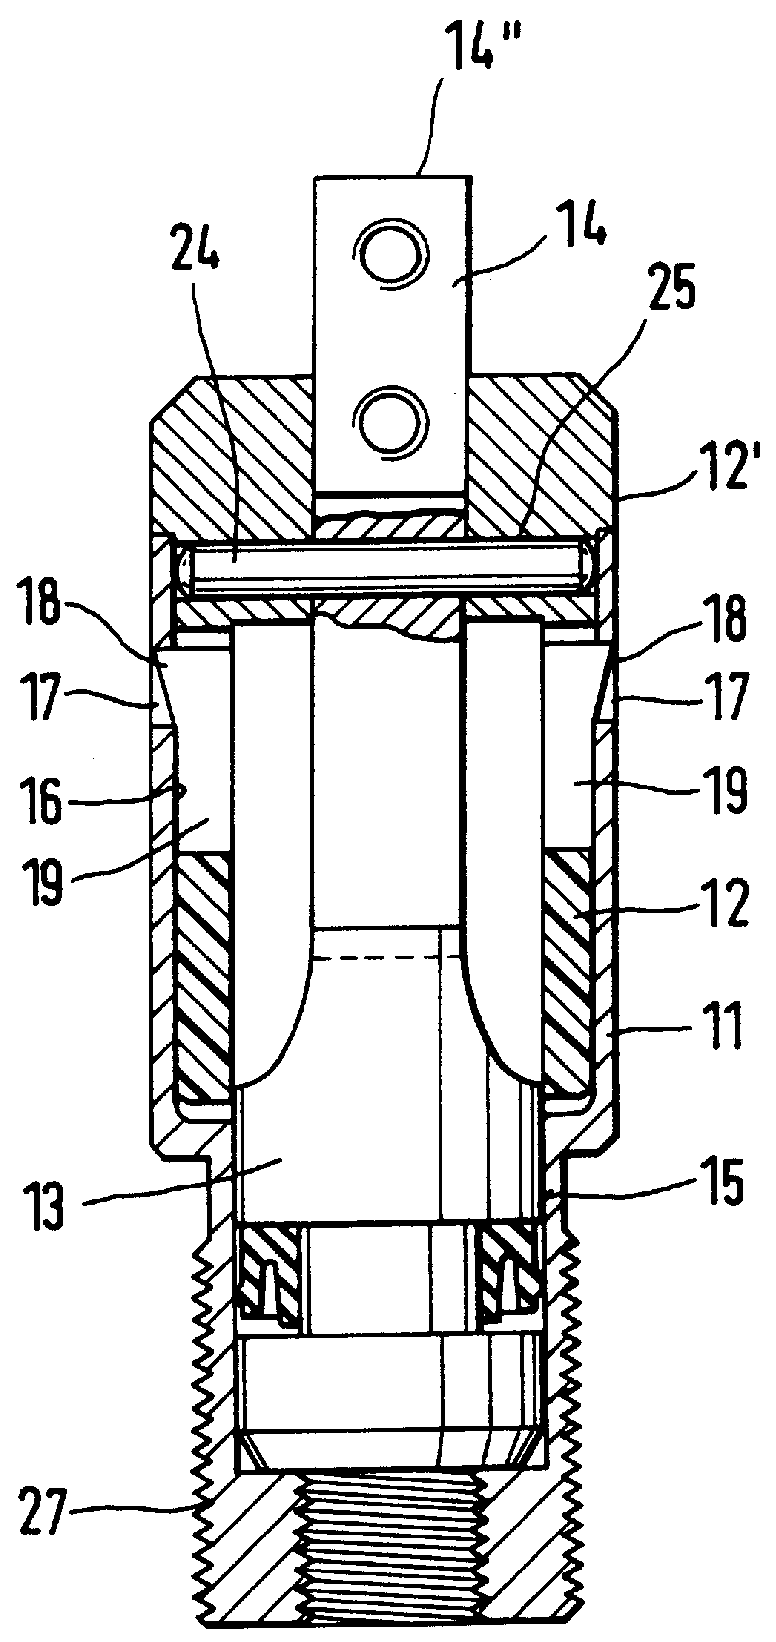 Fluid operated gripper device